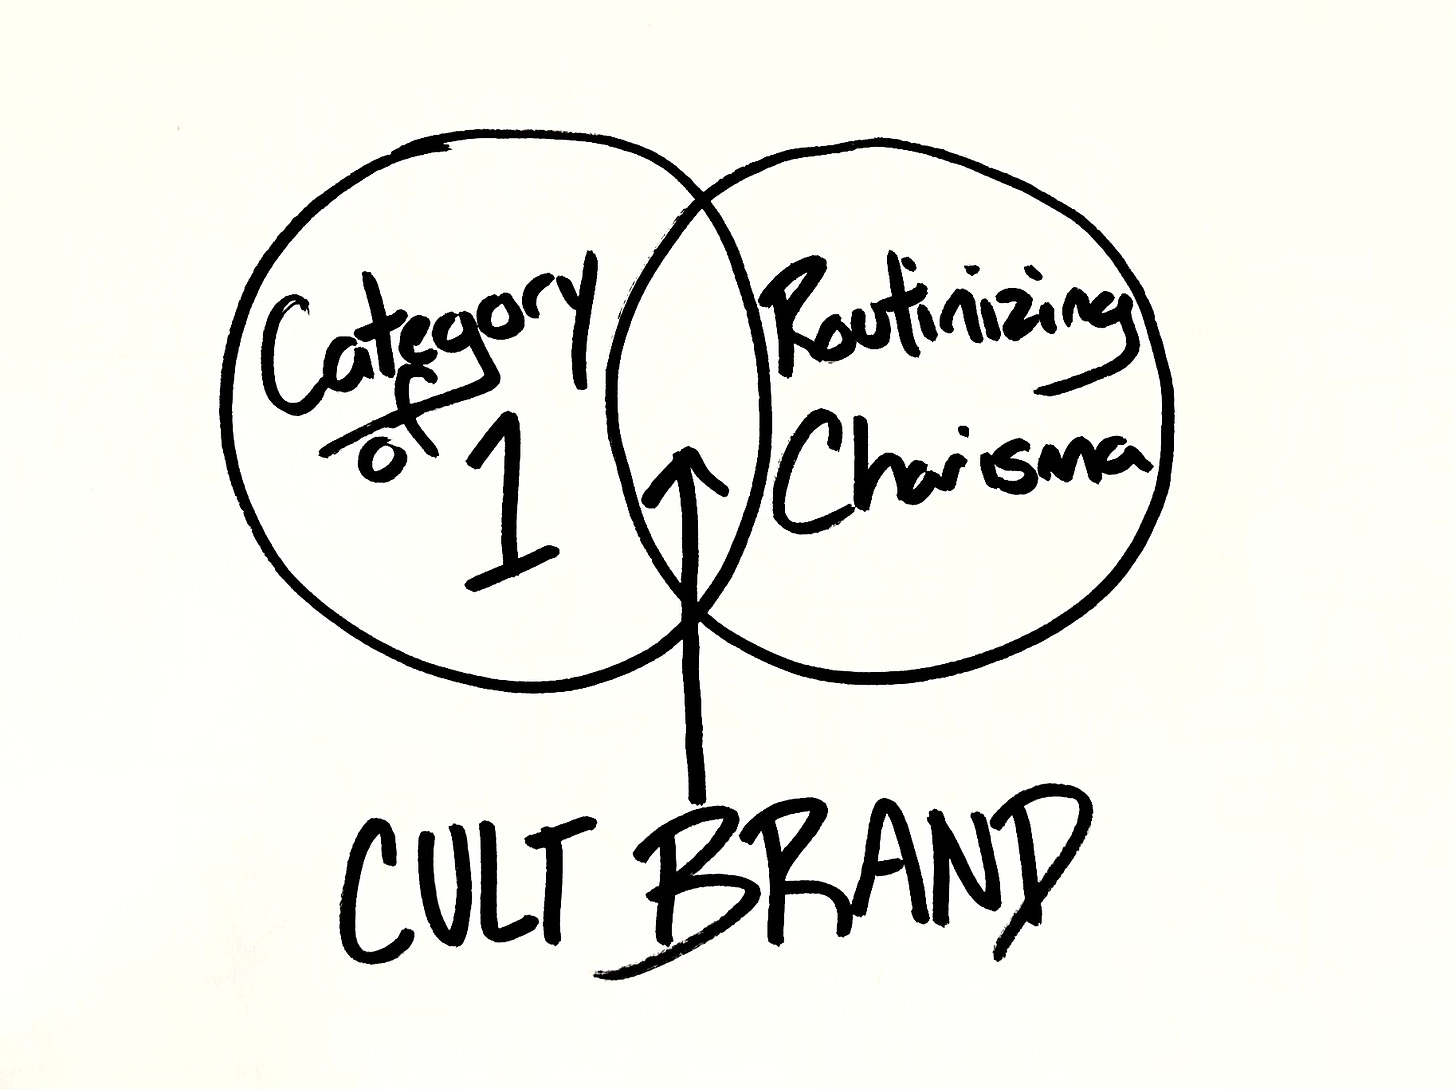 A cult brand happens where being a category of 1 meets routinizing charisma